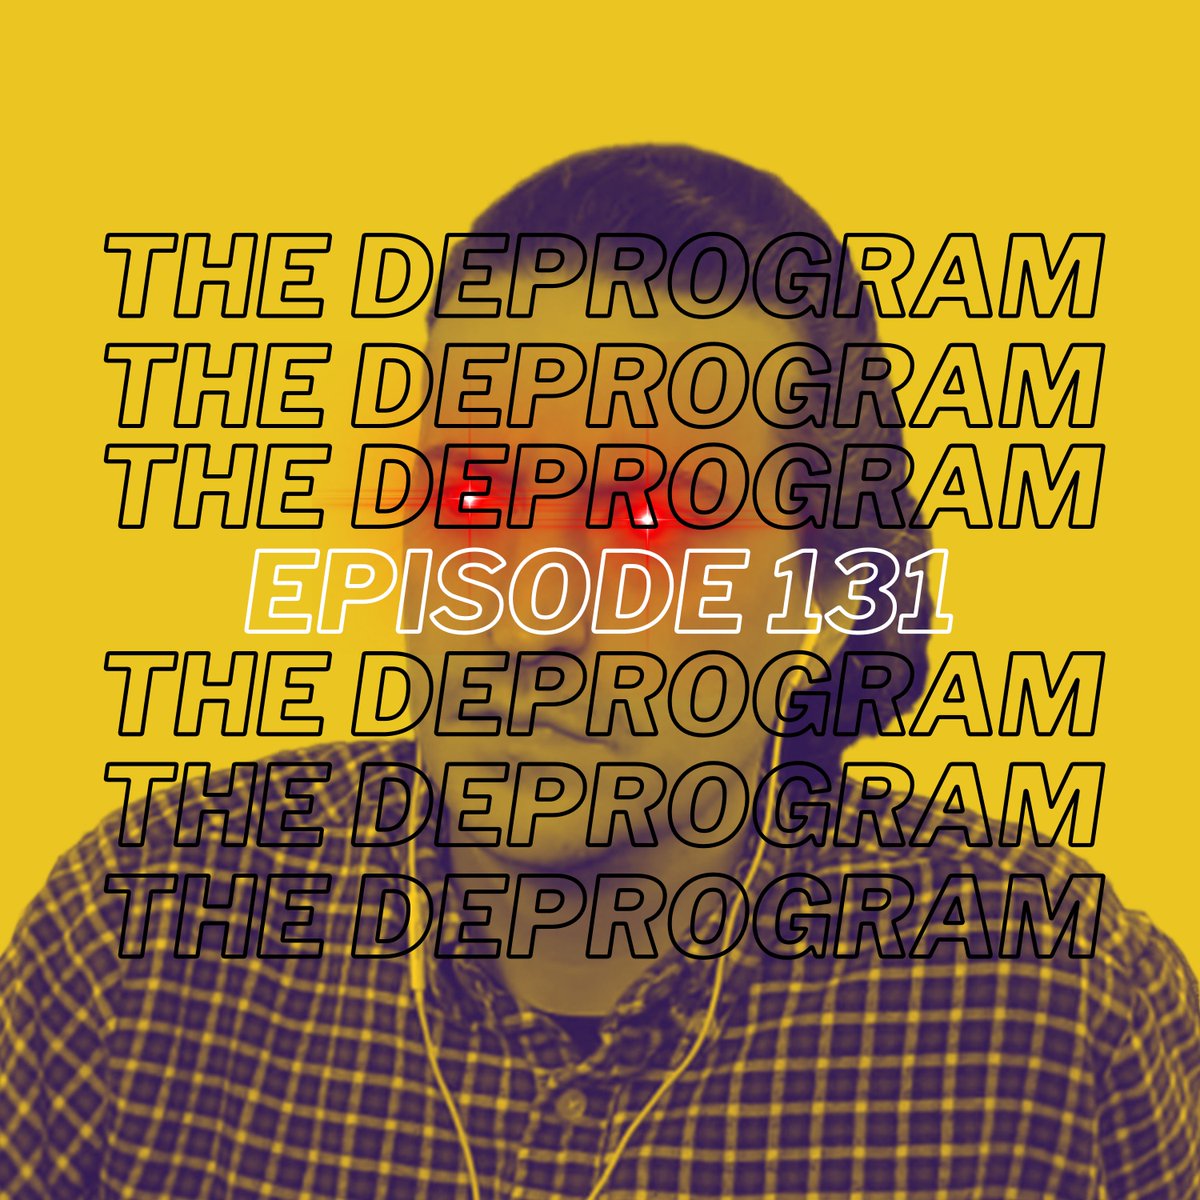 Episode 131 - Hitler 1 vs Hitler 2 (Ft. @Mike_from_PA) is now live EVERYWHERE - open.spotify.com/show/7tk1sTZDe… Also, Episode 132 - *Journalism intensifies* (FT. @AlanRMacLeod ) is now up on Patreon - patreon.com/TheDeprogram